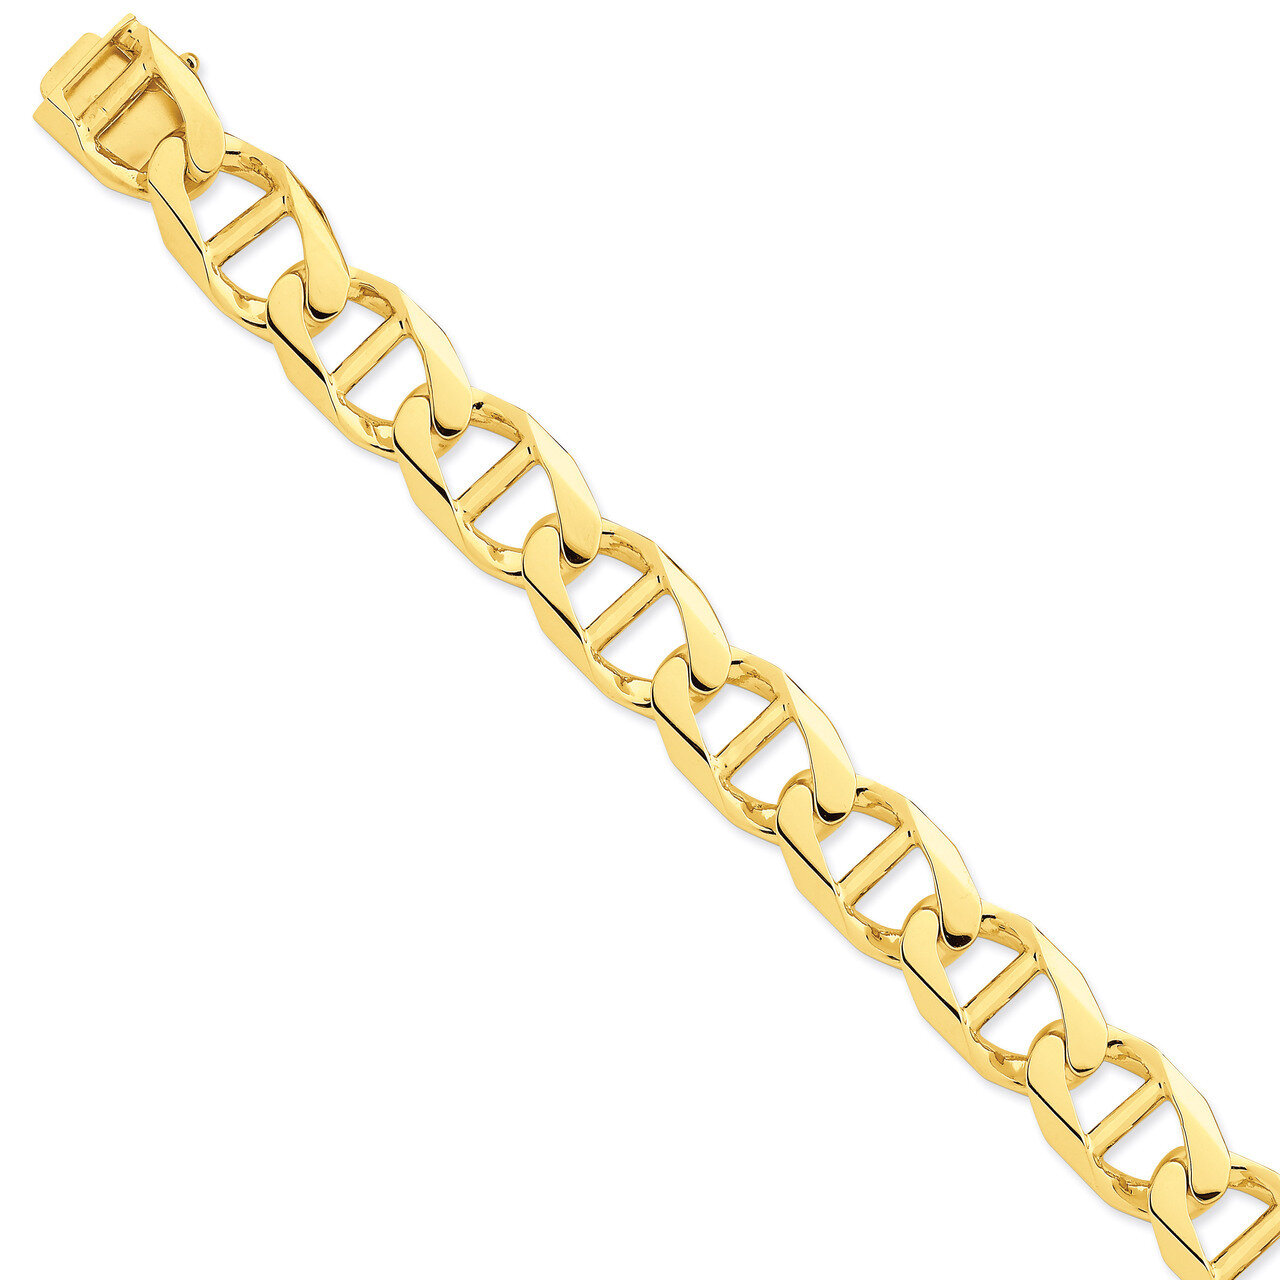 15mm Hand-Polished Anchor Link Chain 20 Inch 14k Gold LK104-20